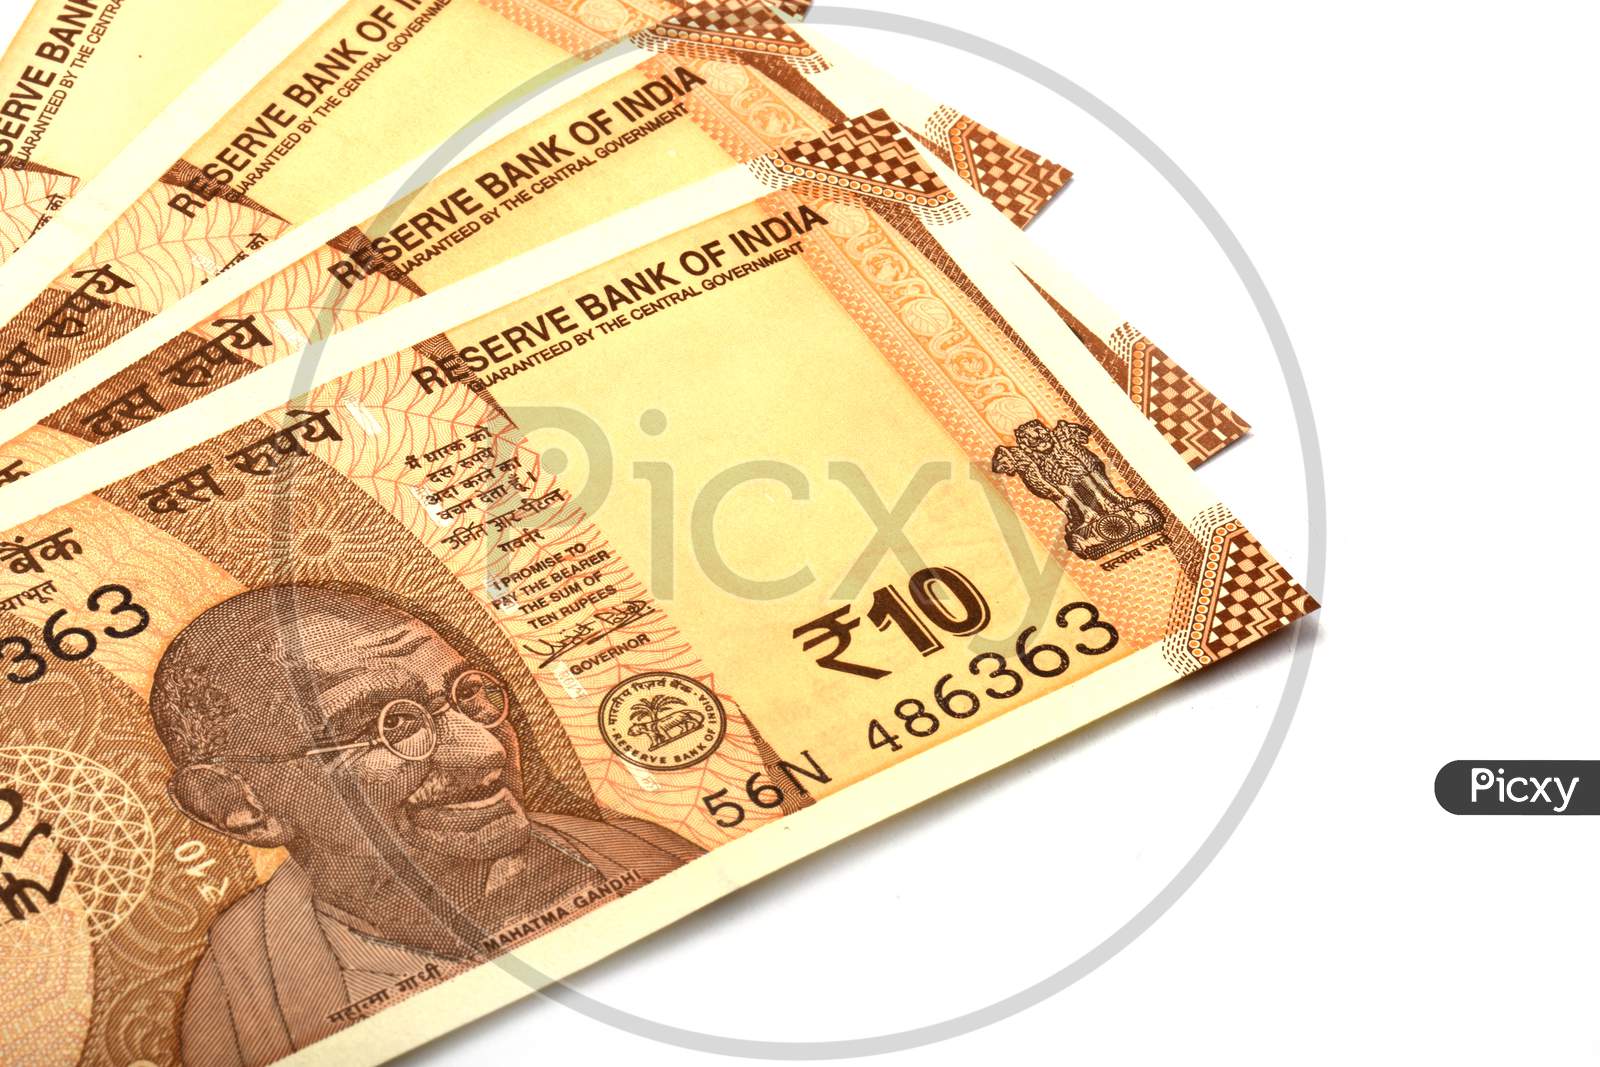 New Indian Currency Of 10 Rupee Note On White Isolated Background, Indian Currency, Rupee, Indian Rupee,Indian Money